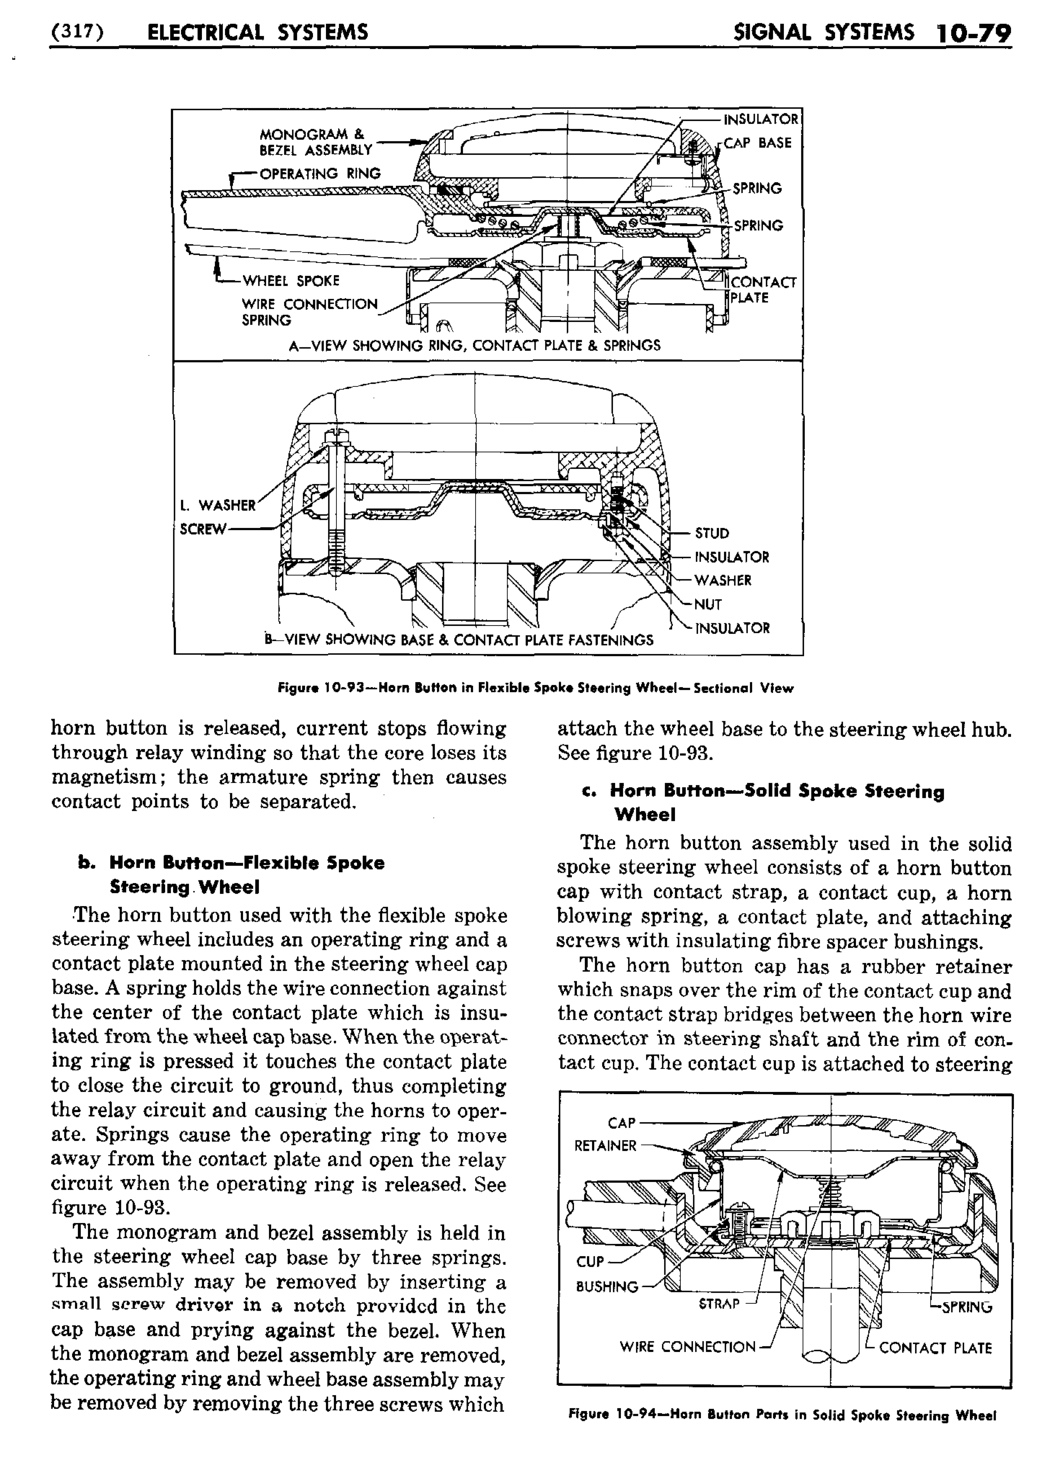 n_11 1950 Buick Shop Manual - Electrical Systems-079-079.jpg